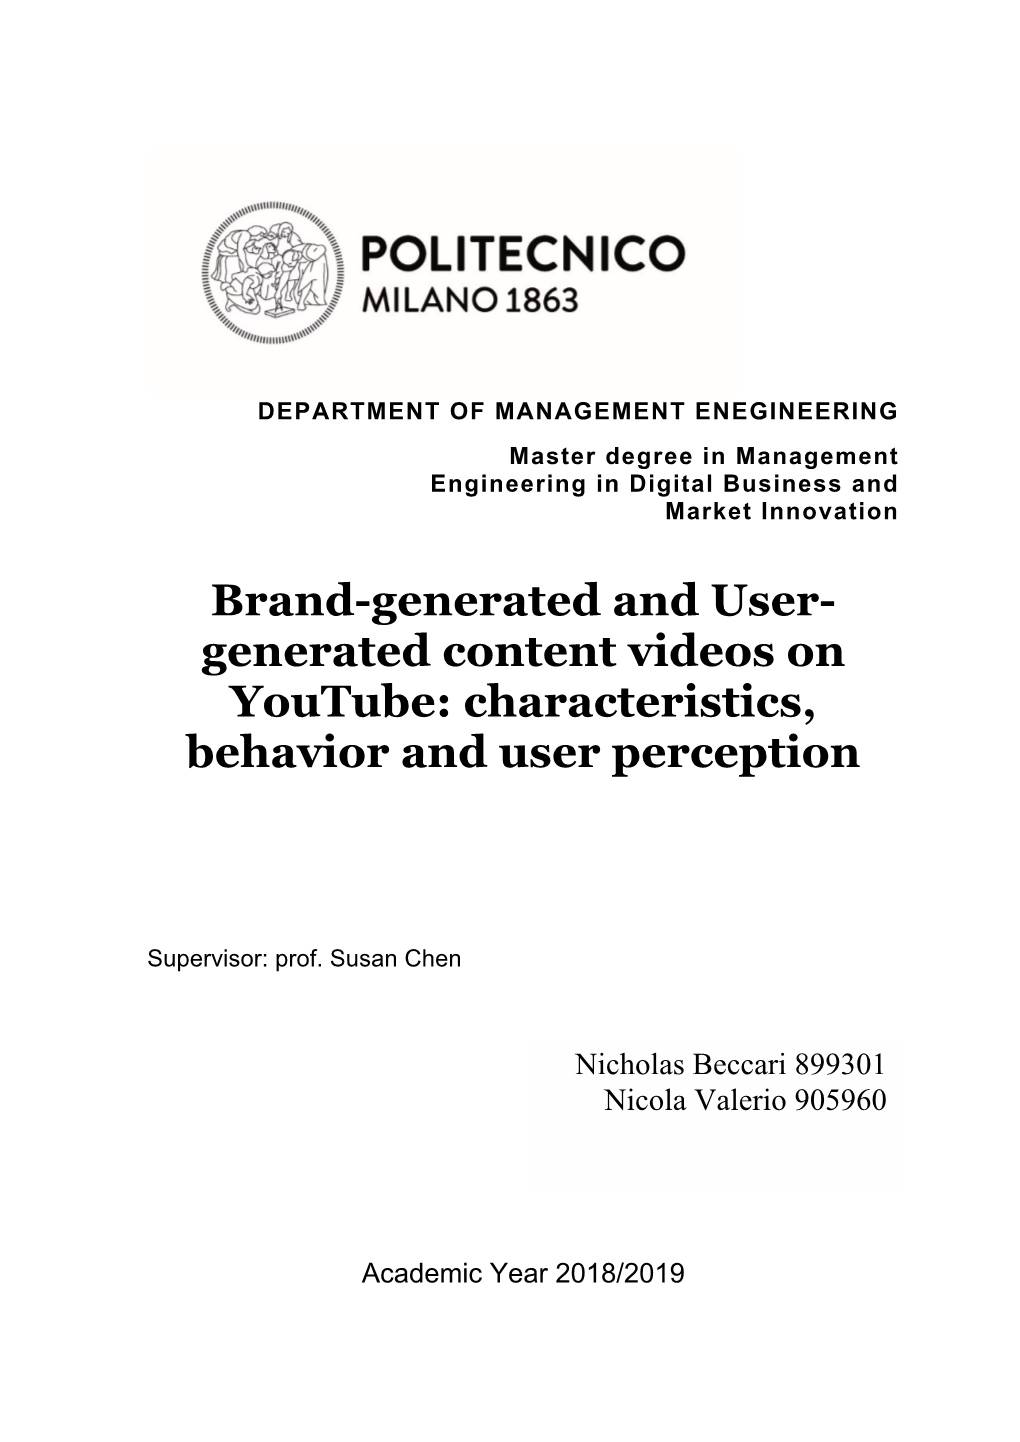 Generated Content Videos on Youtube: Characteristics, Behavior and User Perception